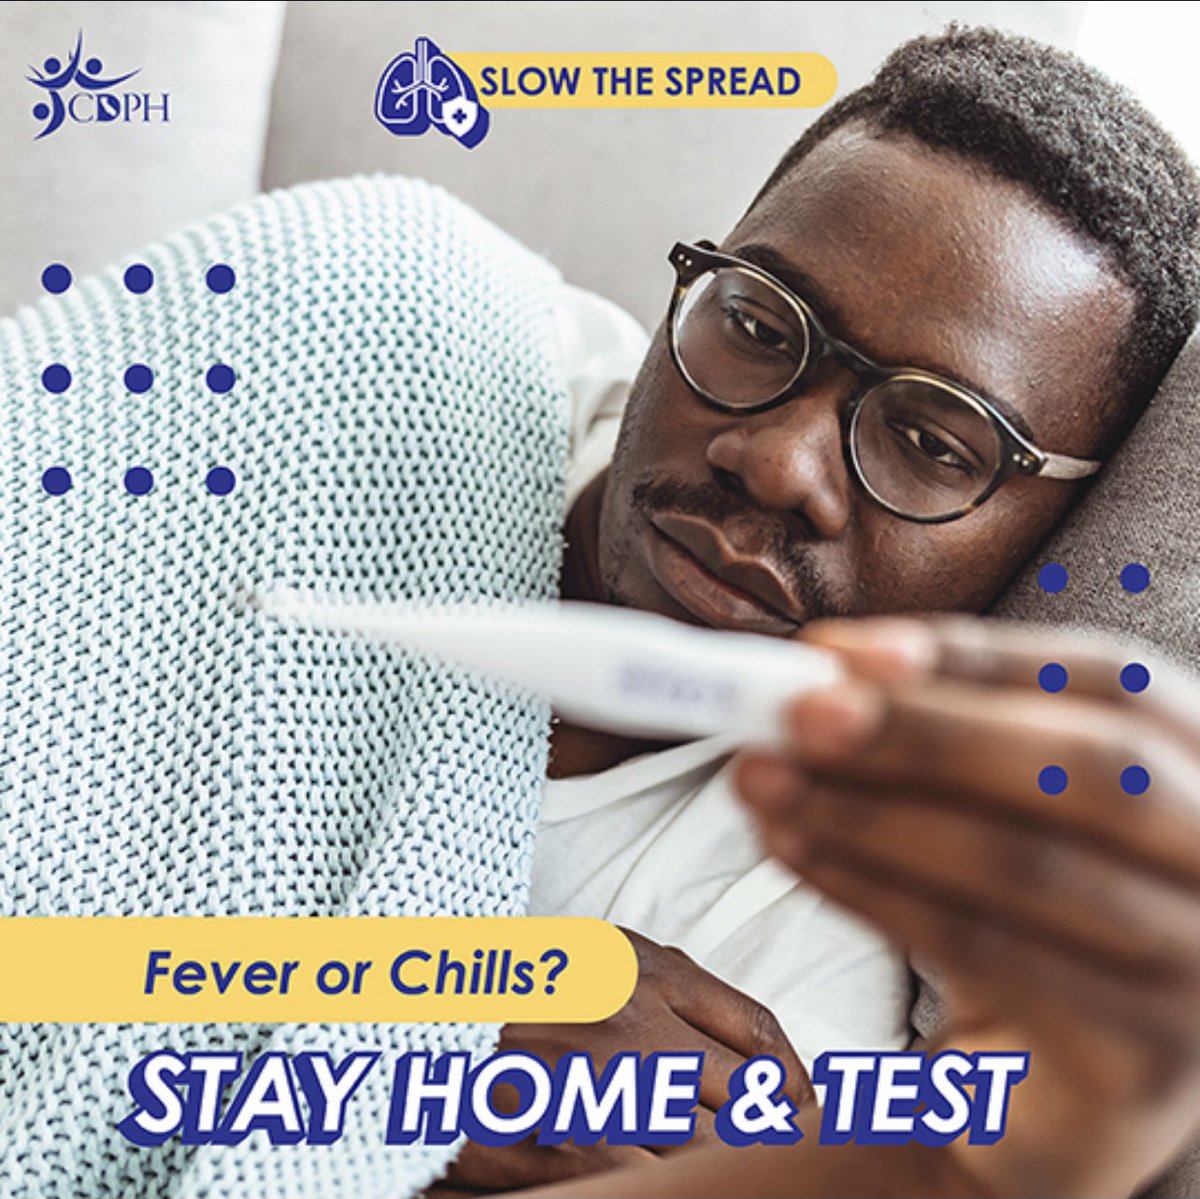 Cold and flu season is here. Prevent the spread of respiratory viruses like COVID-19, the flu, and RSV by staying home and testing for COVID-19 and flu if you have symptoms. Learn more: covid19.ca.gov/get-tested. #SlowTheSpread